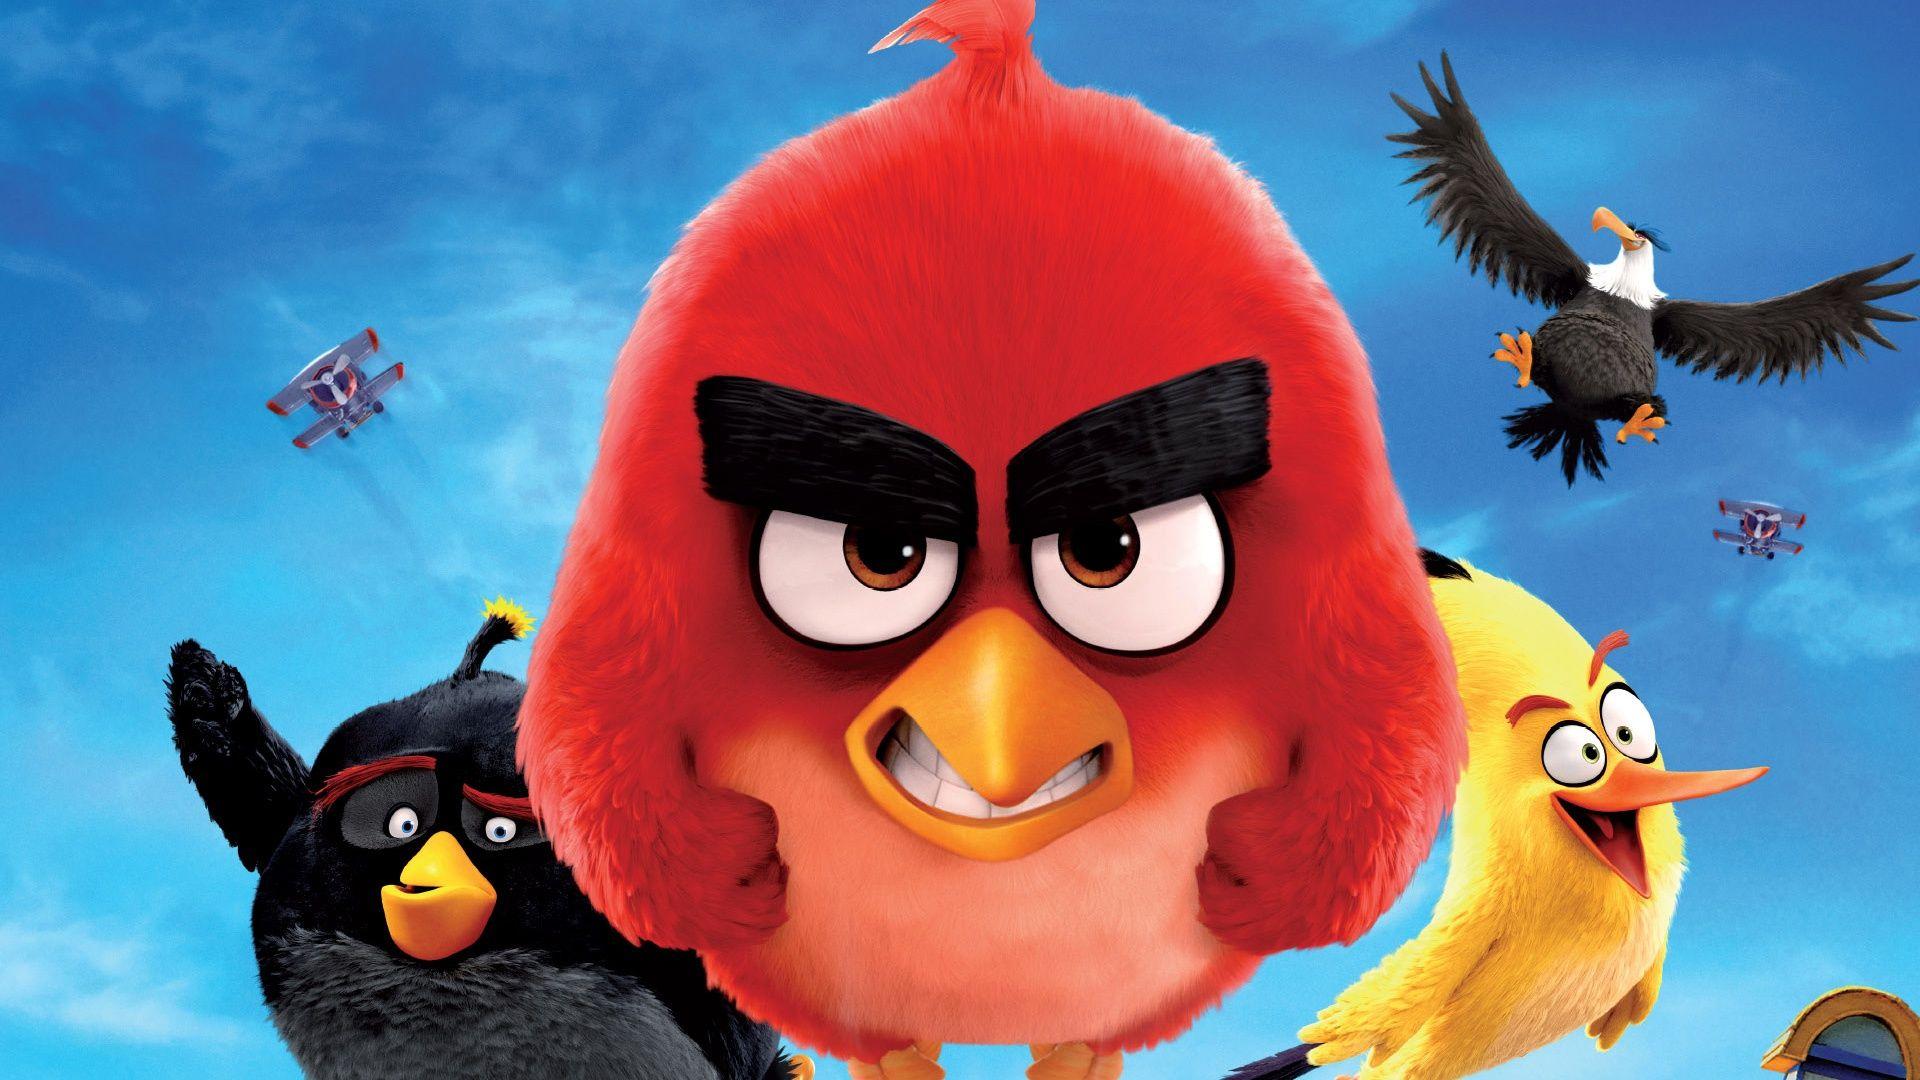 Angry Birds Movie Wallpaper in jpg format for free download